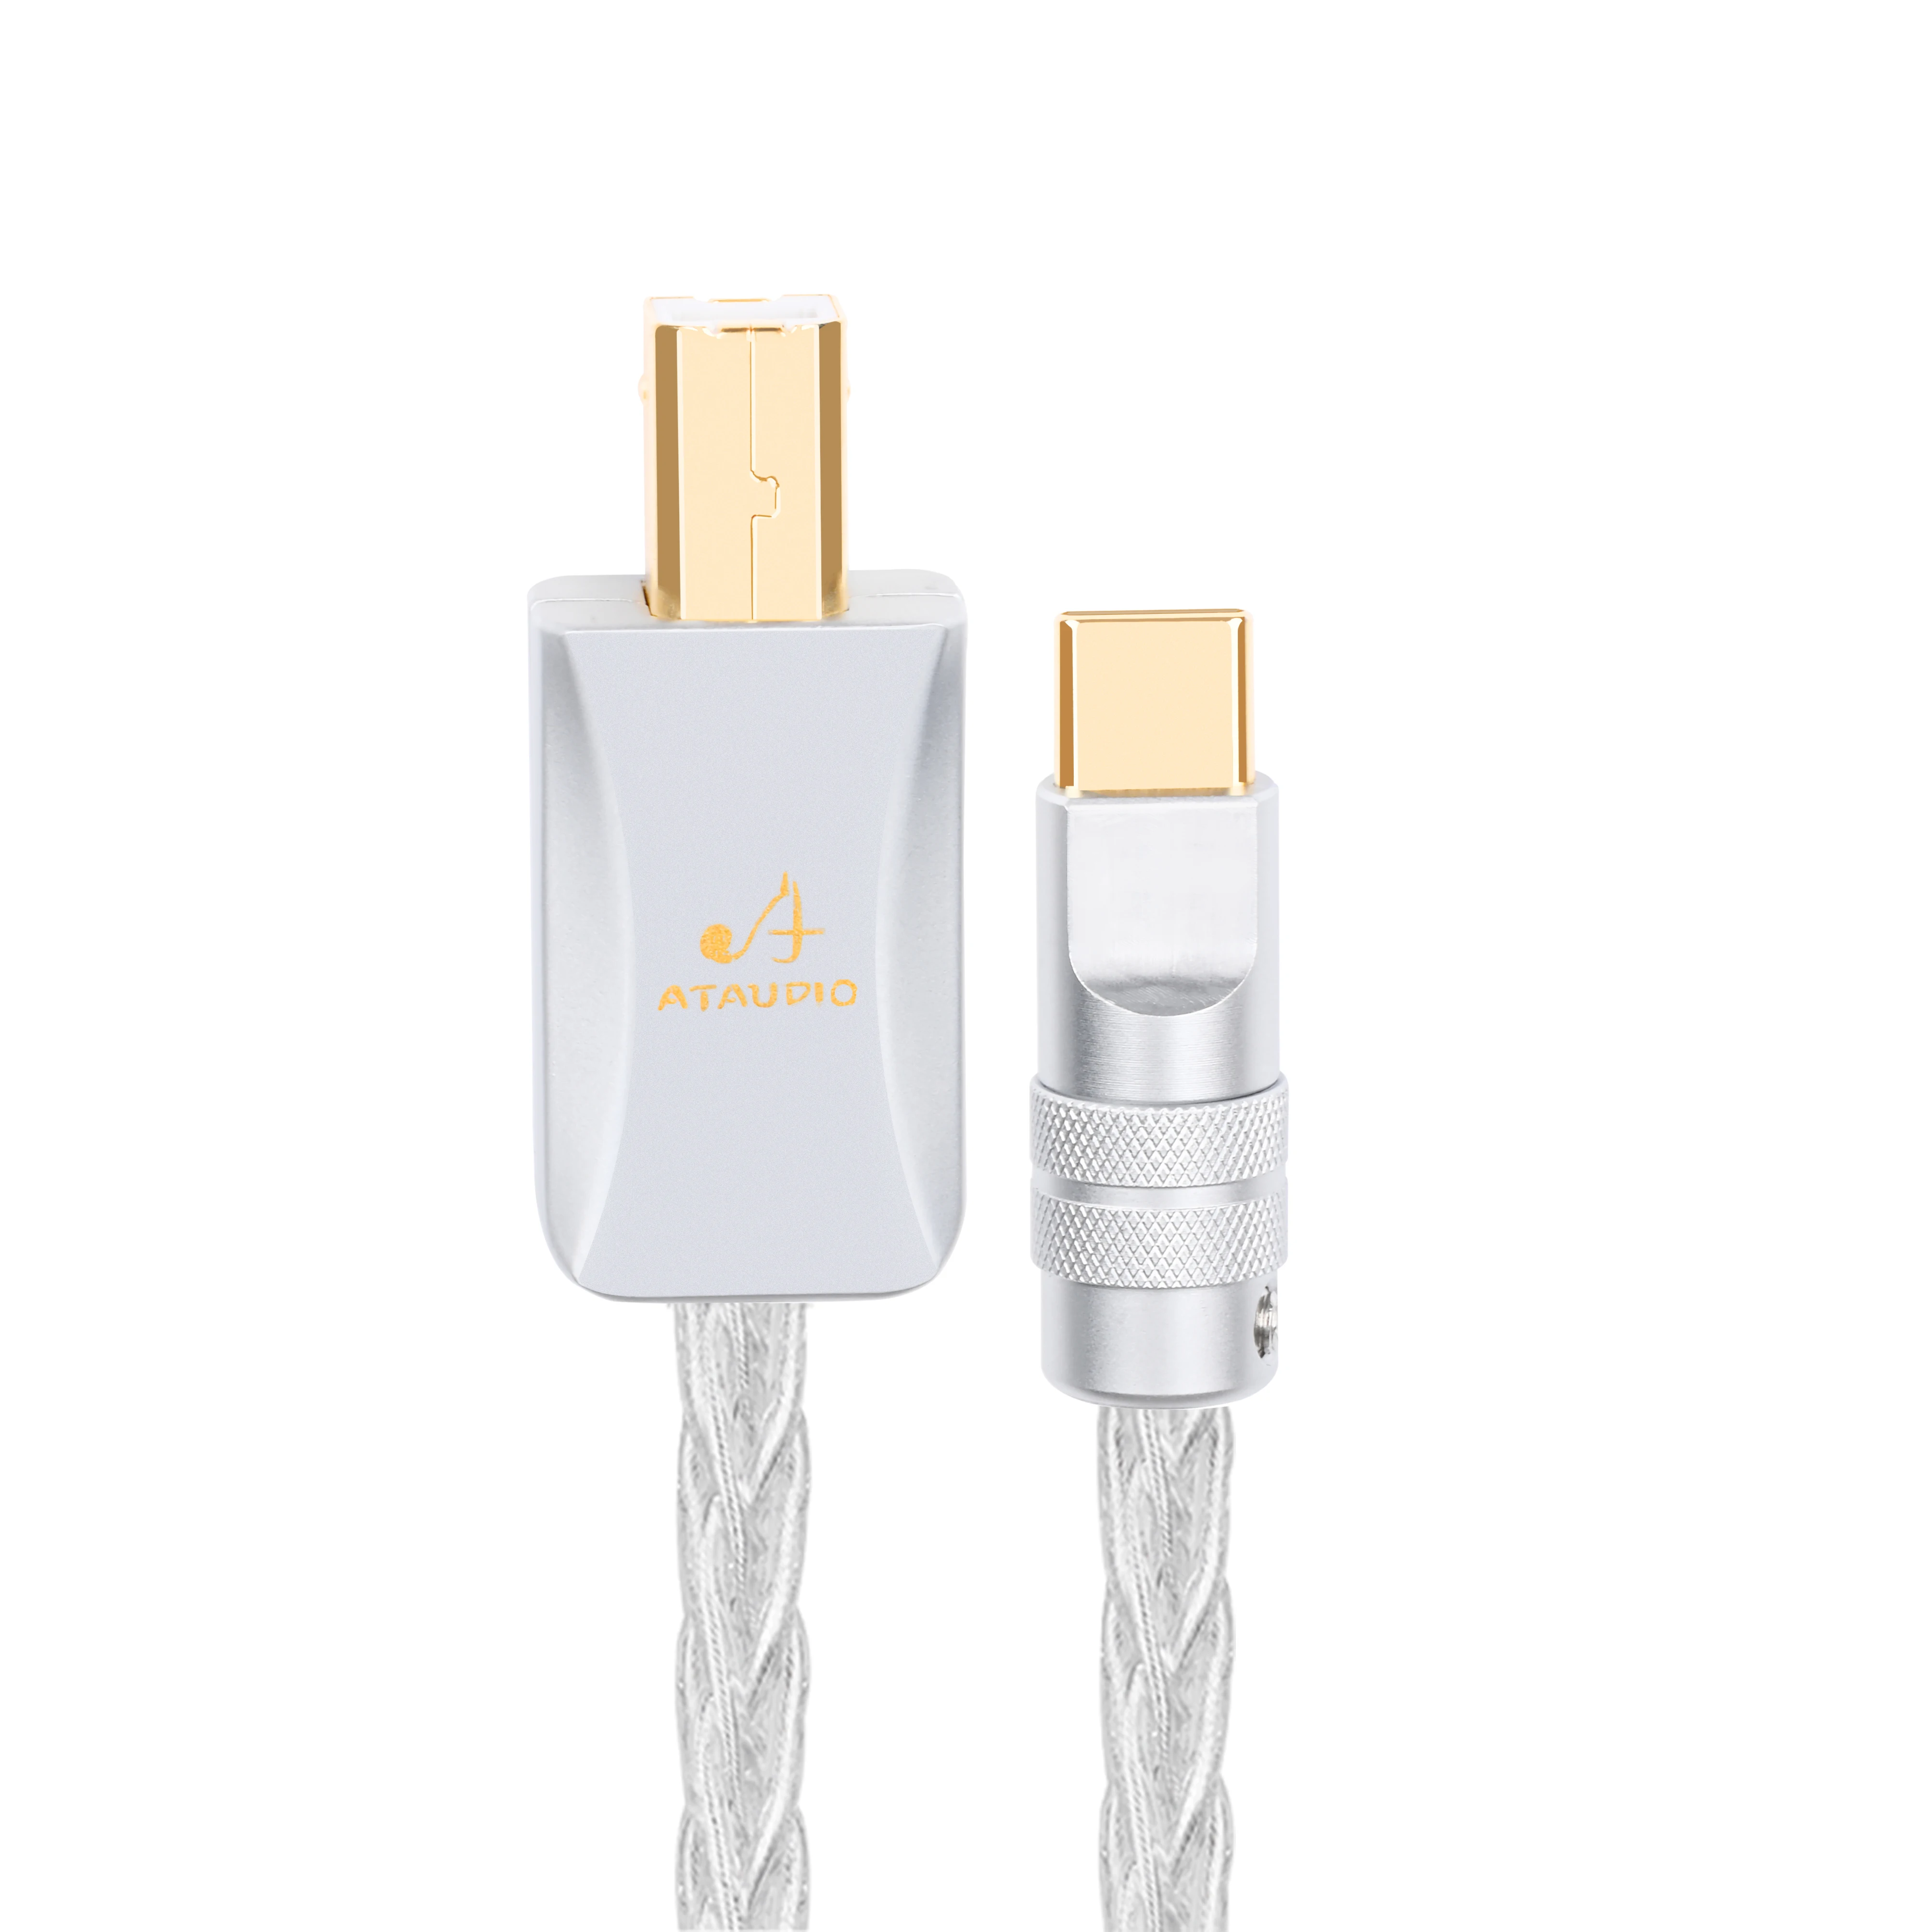 Hifi Pure Silver Usb Cable High Performance Type C to Type B Otg Data Audio Cable For Mobilephone and DAC images - 6